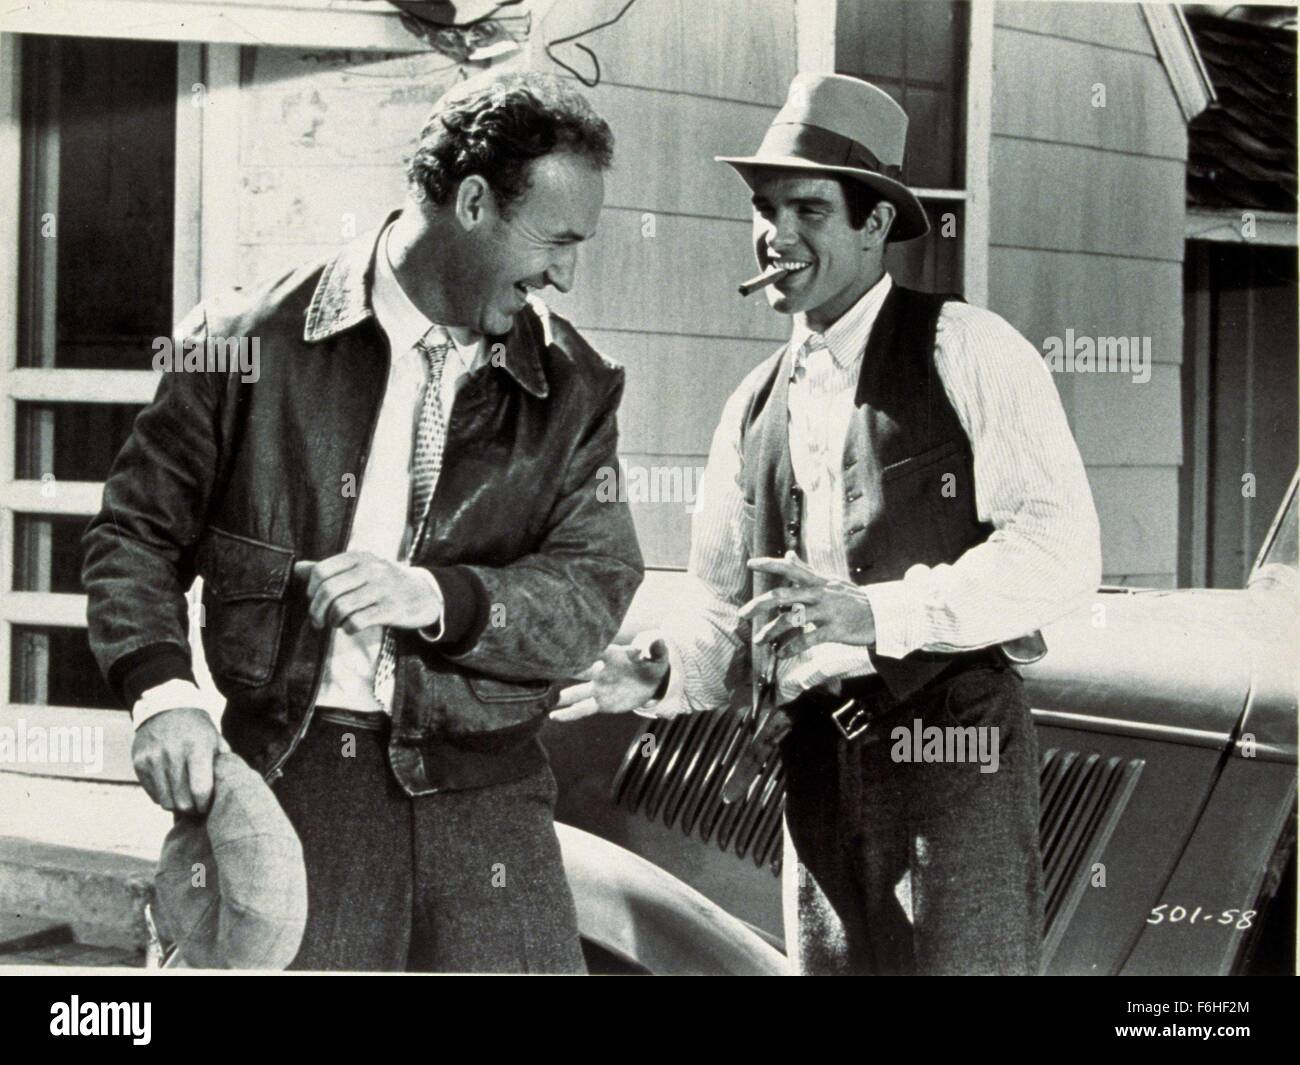 1967, Film Title: BONNIE AND CLYDE, Director: ARTHUR PENN, Studio: WARNER, Pictured: WARREN BEATTY, CHARACTER, CLYDE BARROW: BANK ROBBER, GENE HACKMAN, HISTORICAL, CIGAR, CLOWNING, ROAD MOVIE. (Credit Image: SNAP) Stock Photo